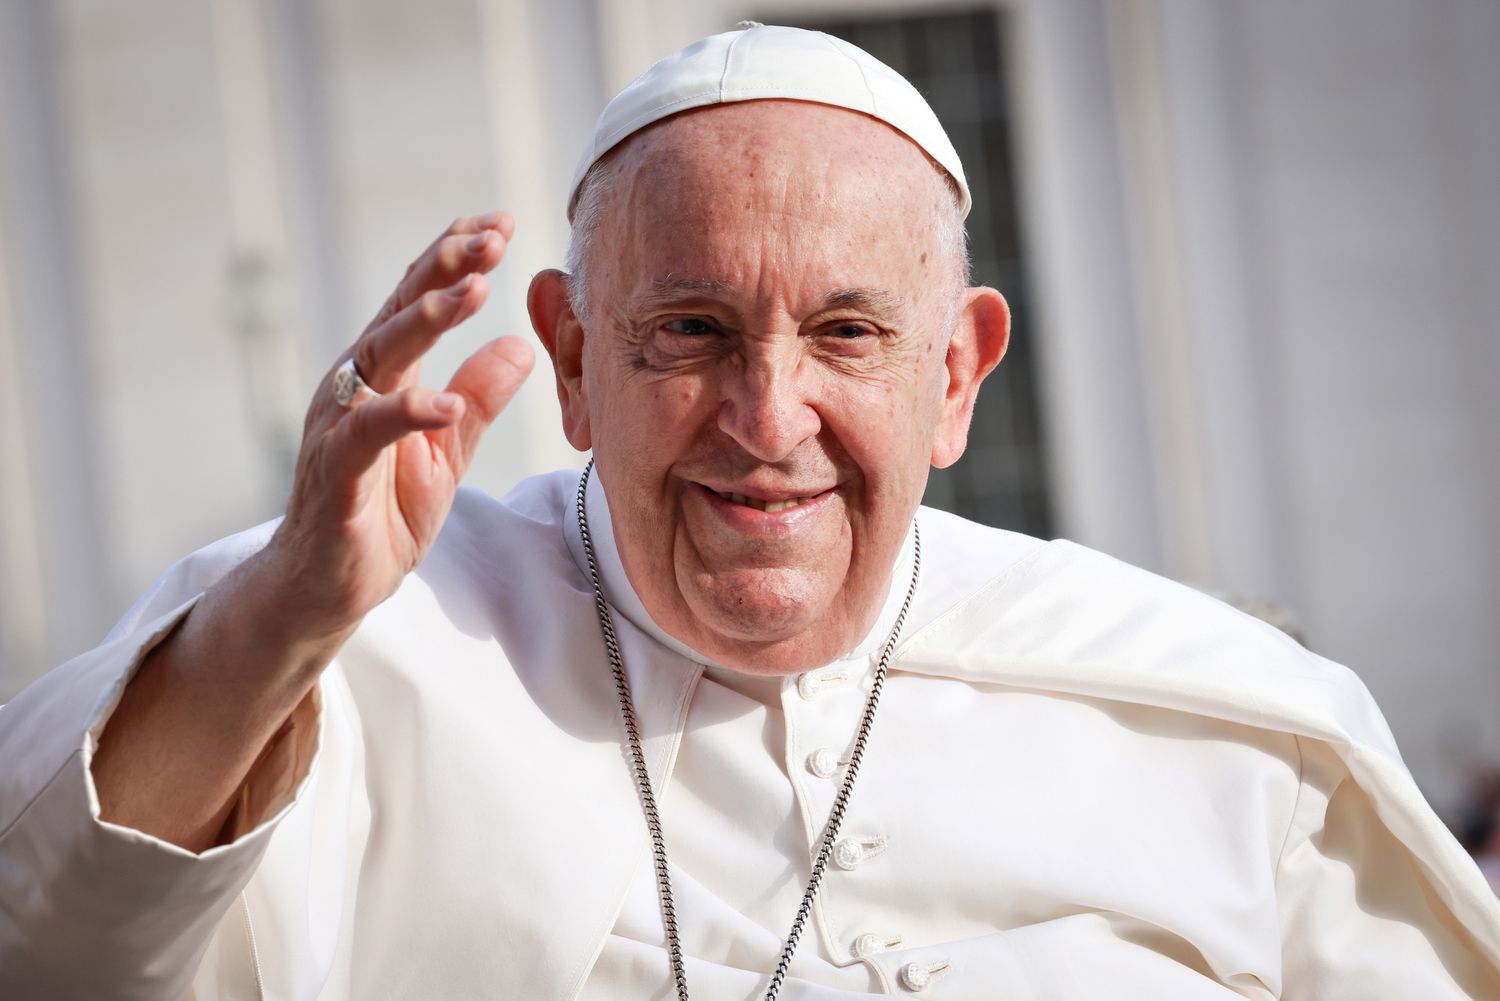 Pope Francis Suggests Possibility of Blessing Same-Sex Unions